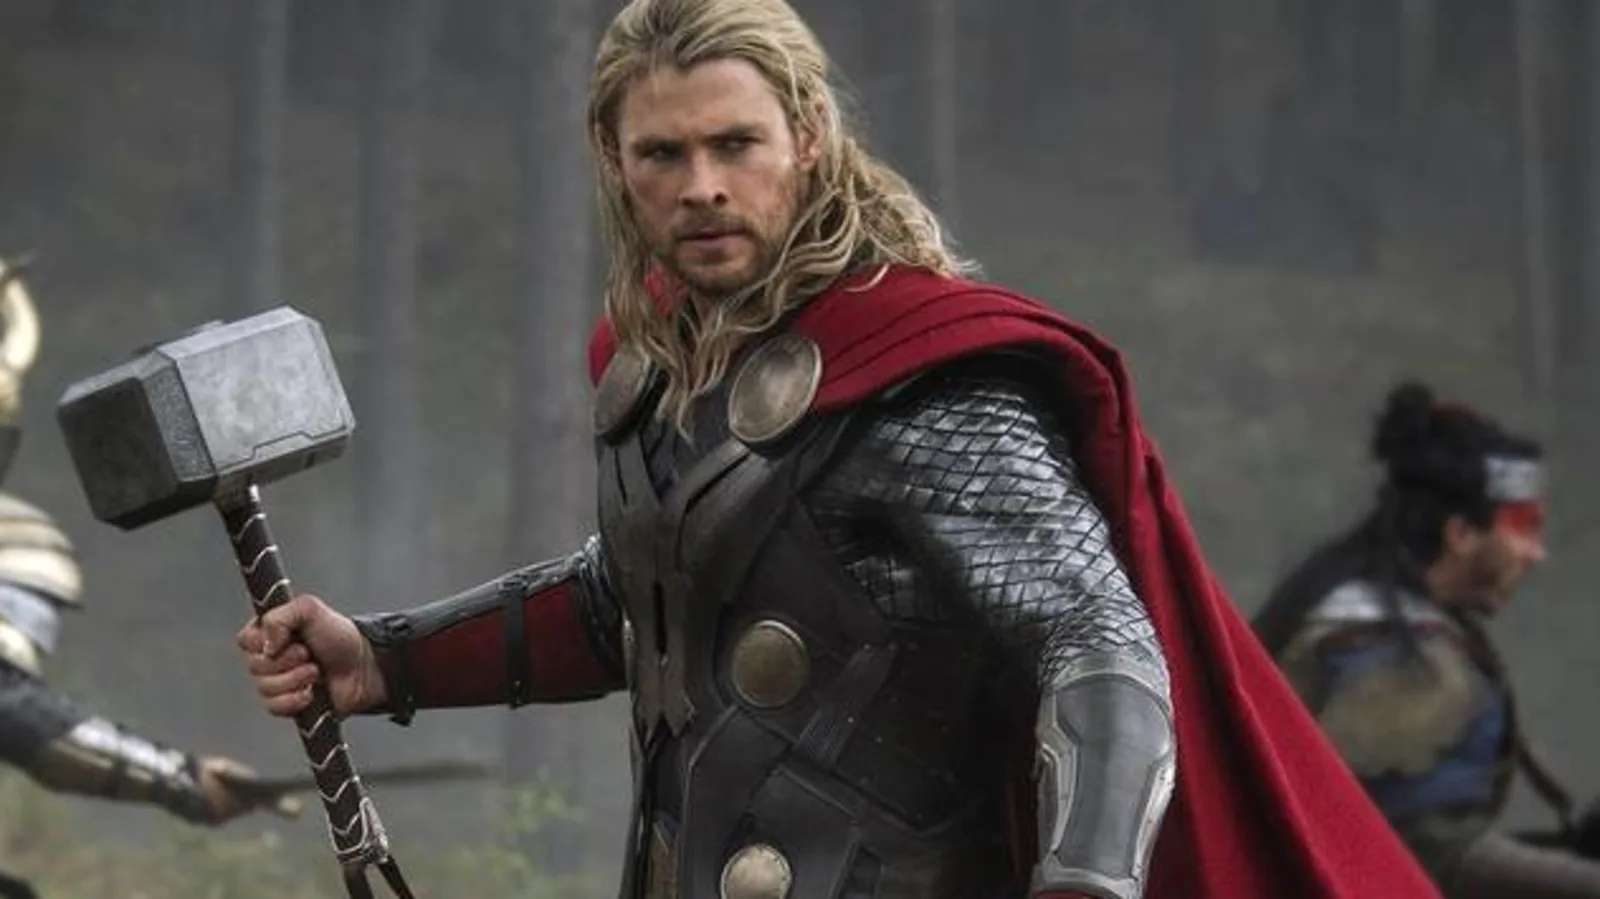 Chris Hemsworth hints he may be done as Thor in the Marvel Cinematic Universe: ‘Enthusiasm might be waning’